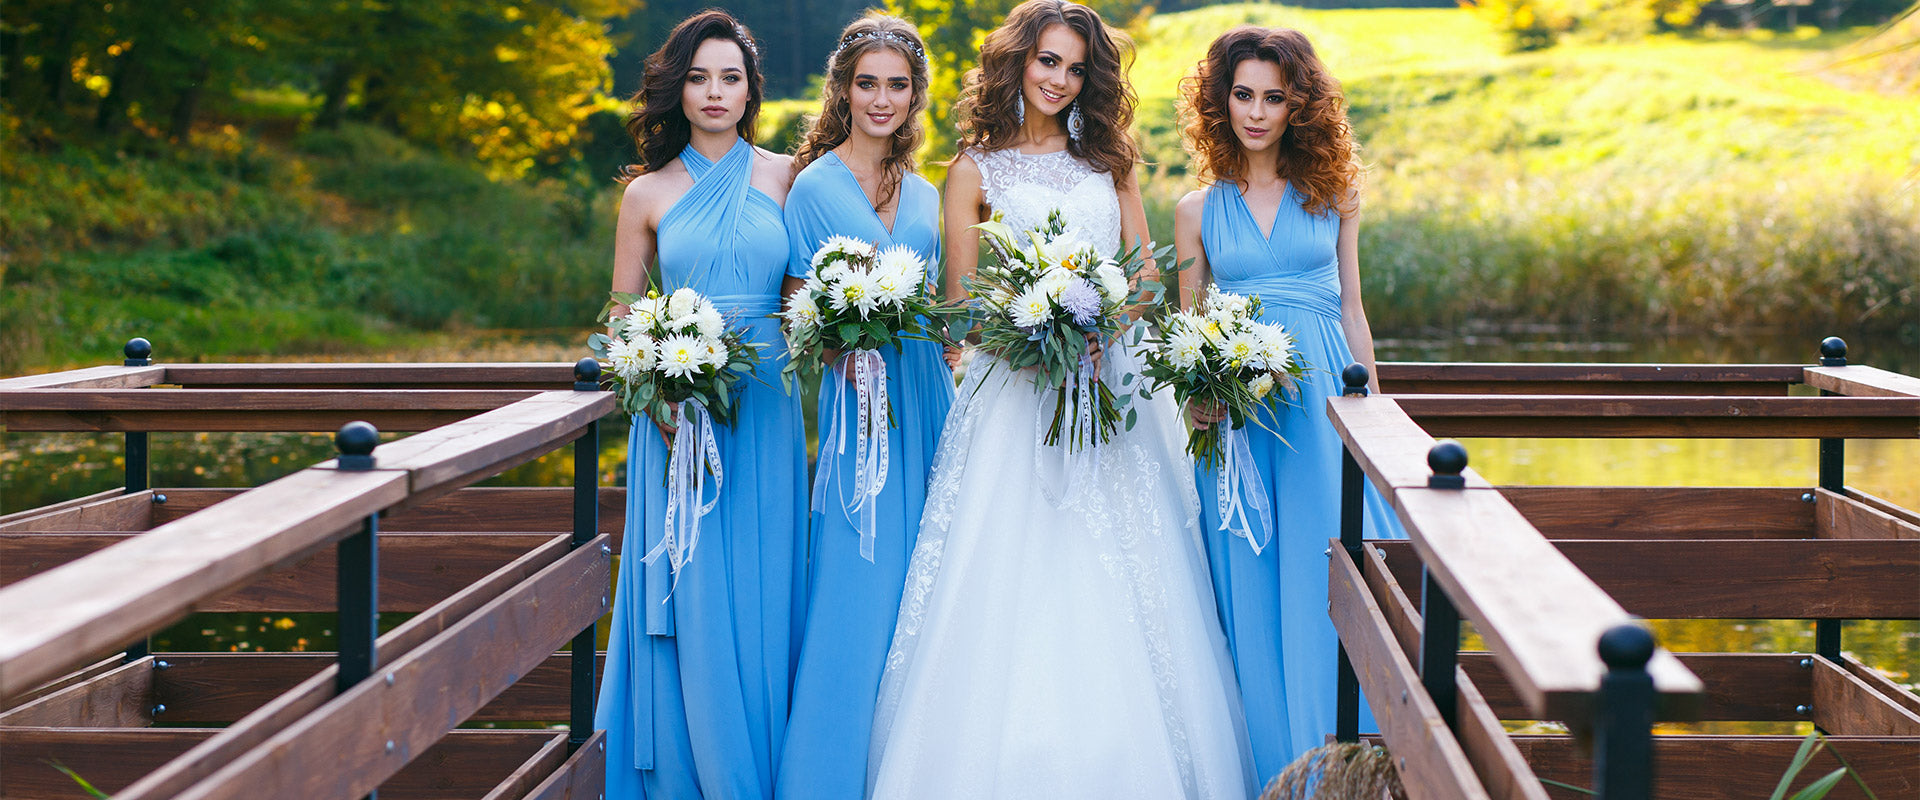 2021 Fashion Tips: How to Choose Your Bridesmaids Dress?